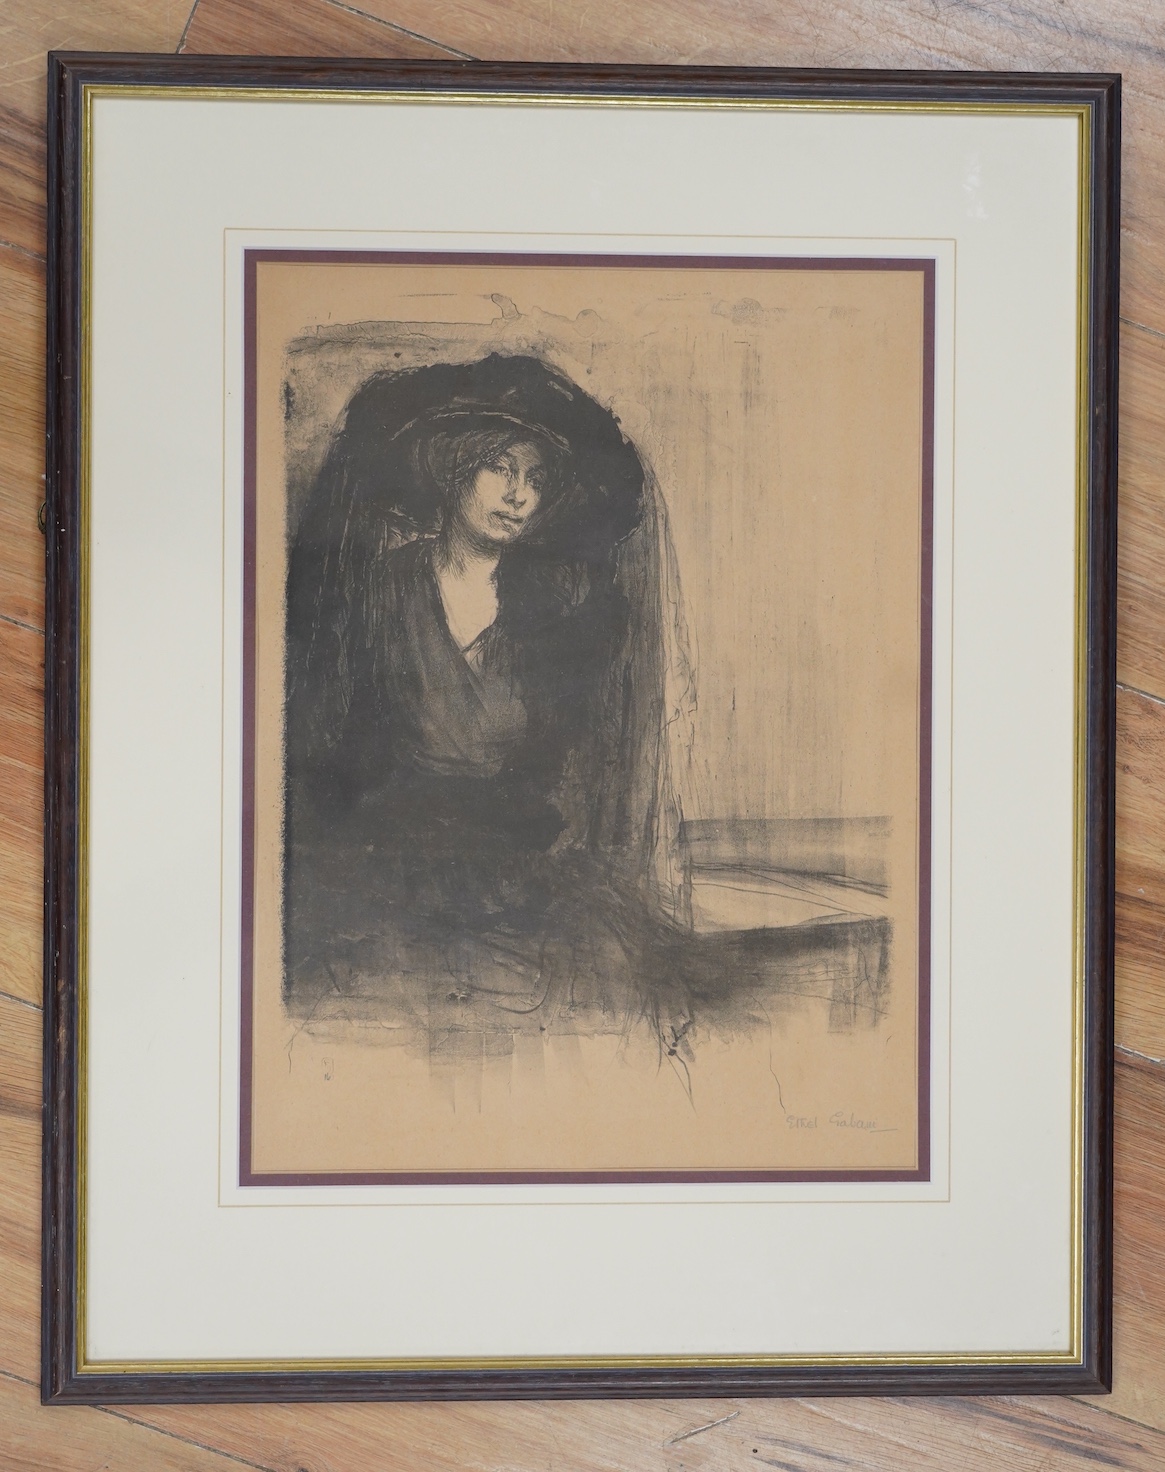 Ethel Gabain (French, 1883-1950), lithograph, 'Deuil' (Mourning), signed in pencil, 41 x 30cm. Condition - fair, paper browned